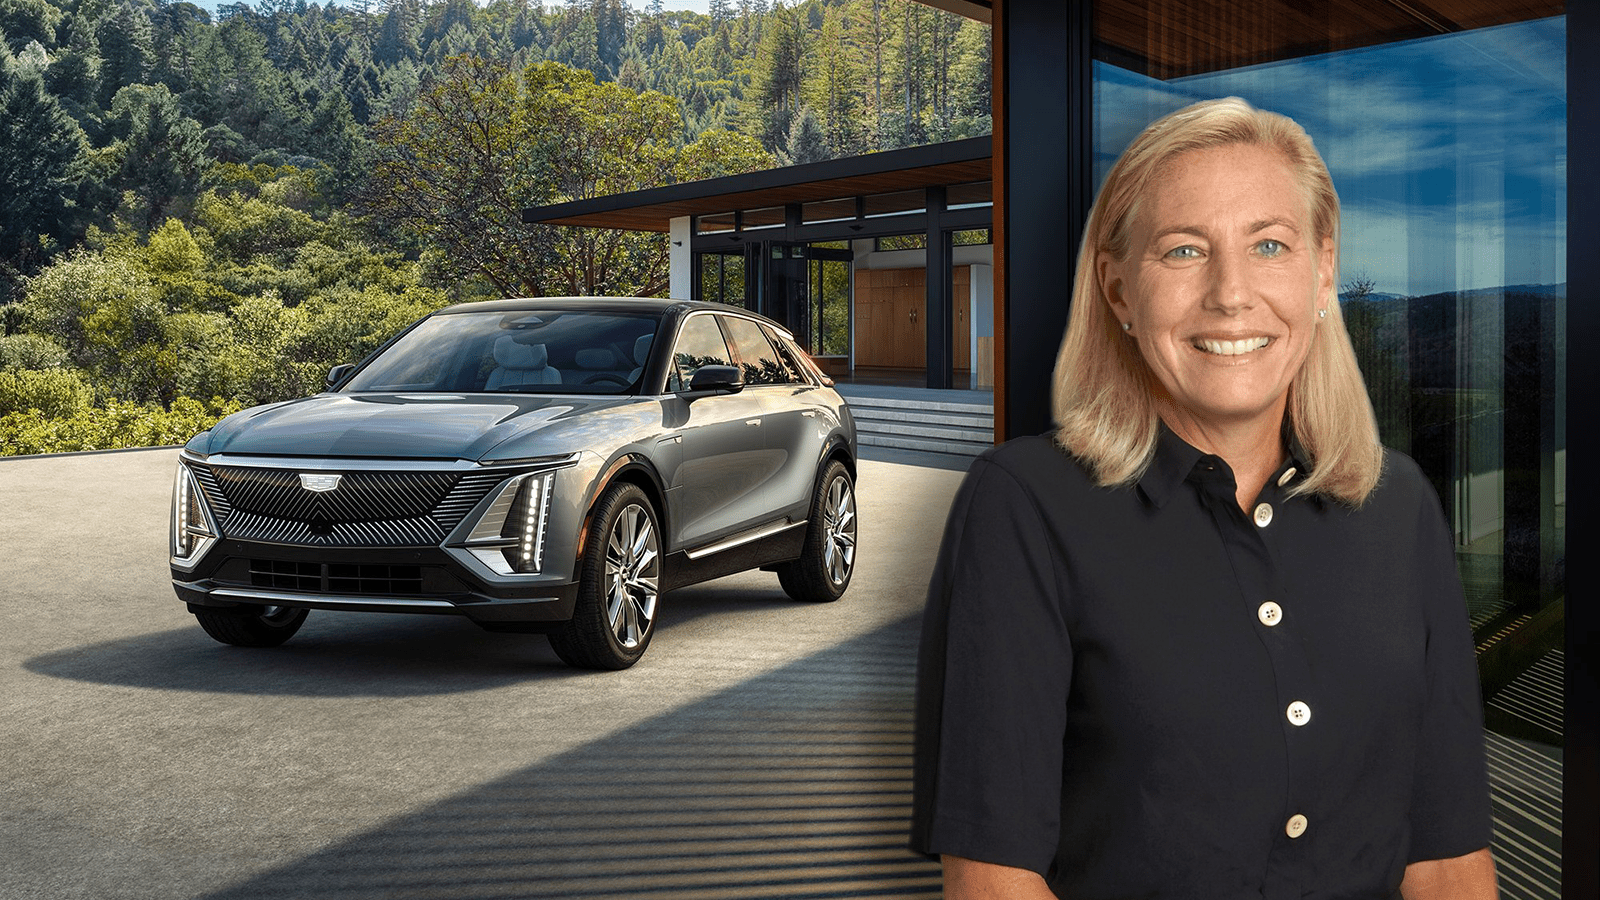 GM adds Tapestry CEO Joanne Crevoiserat to board of directors